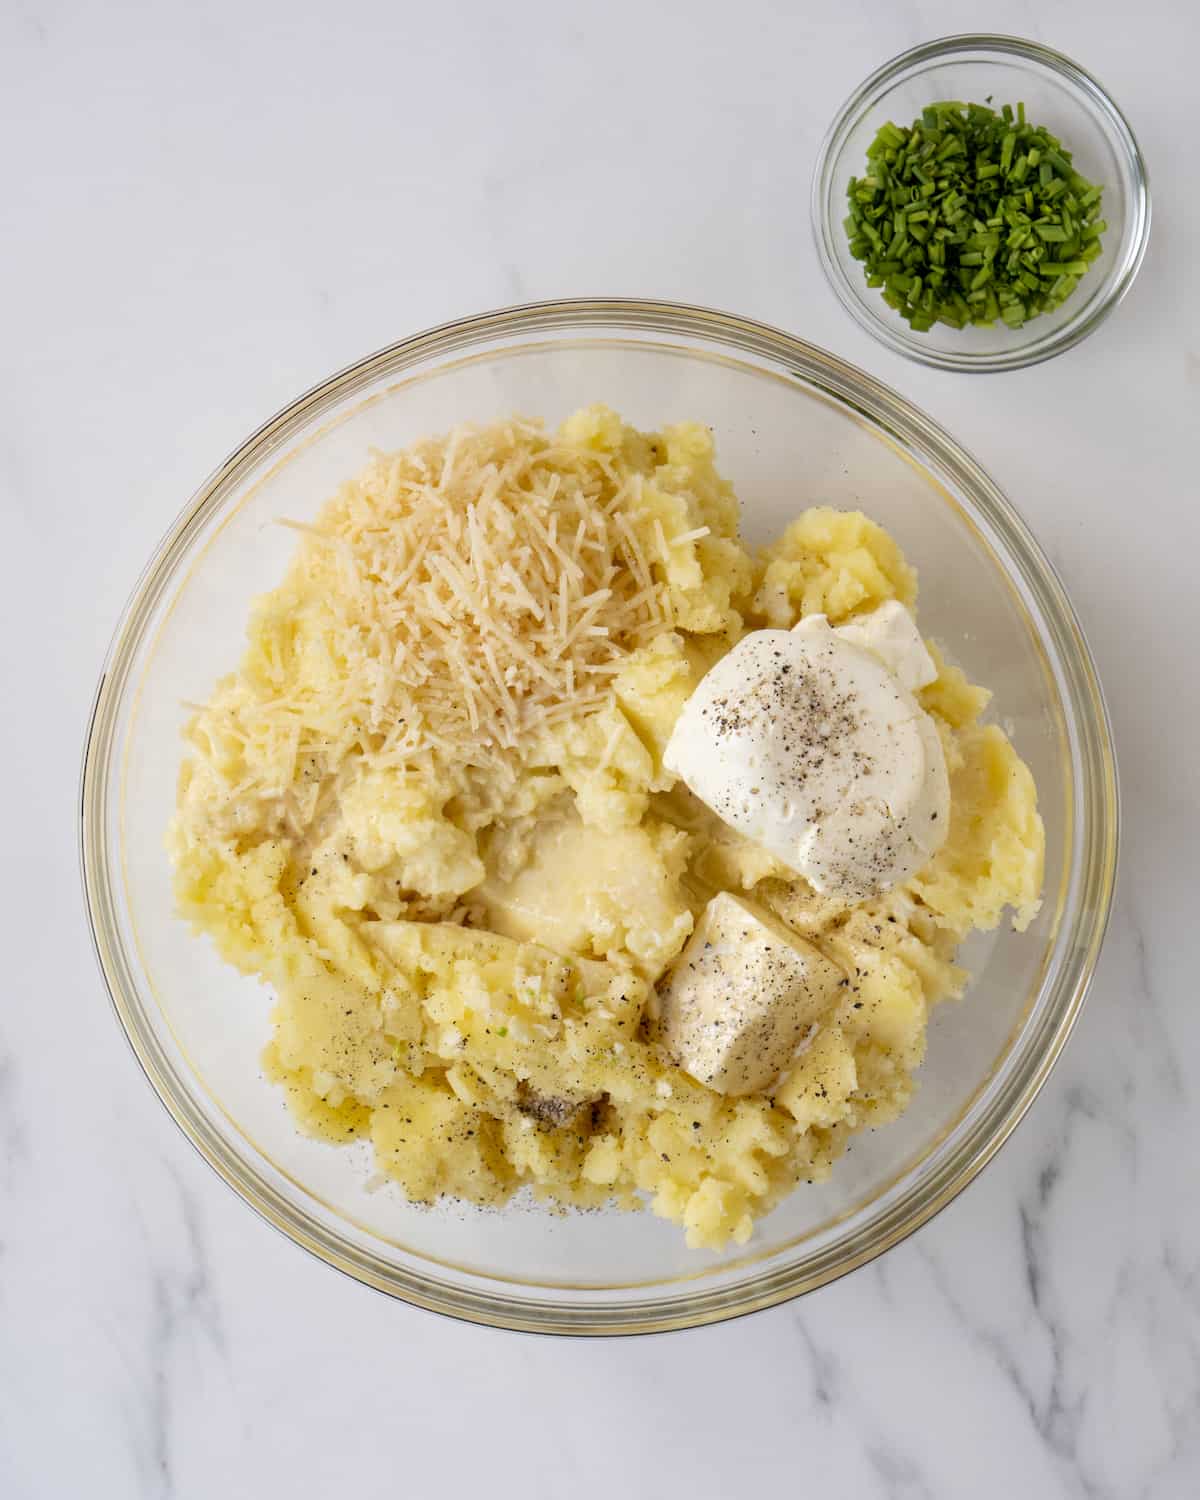 A glass bowl of the mashed potatoes with the marscapone cheese, parmesan cheese, garlic, and butter.  